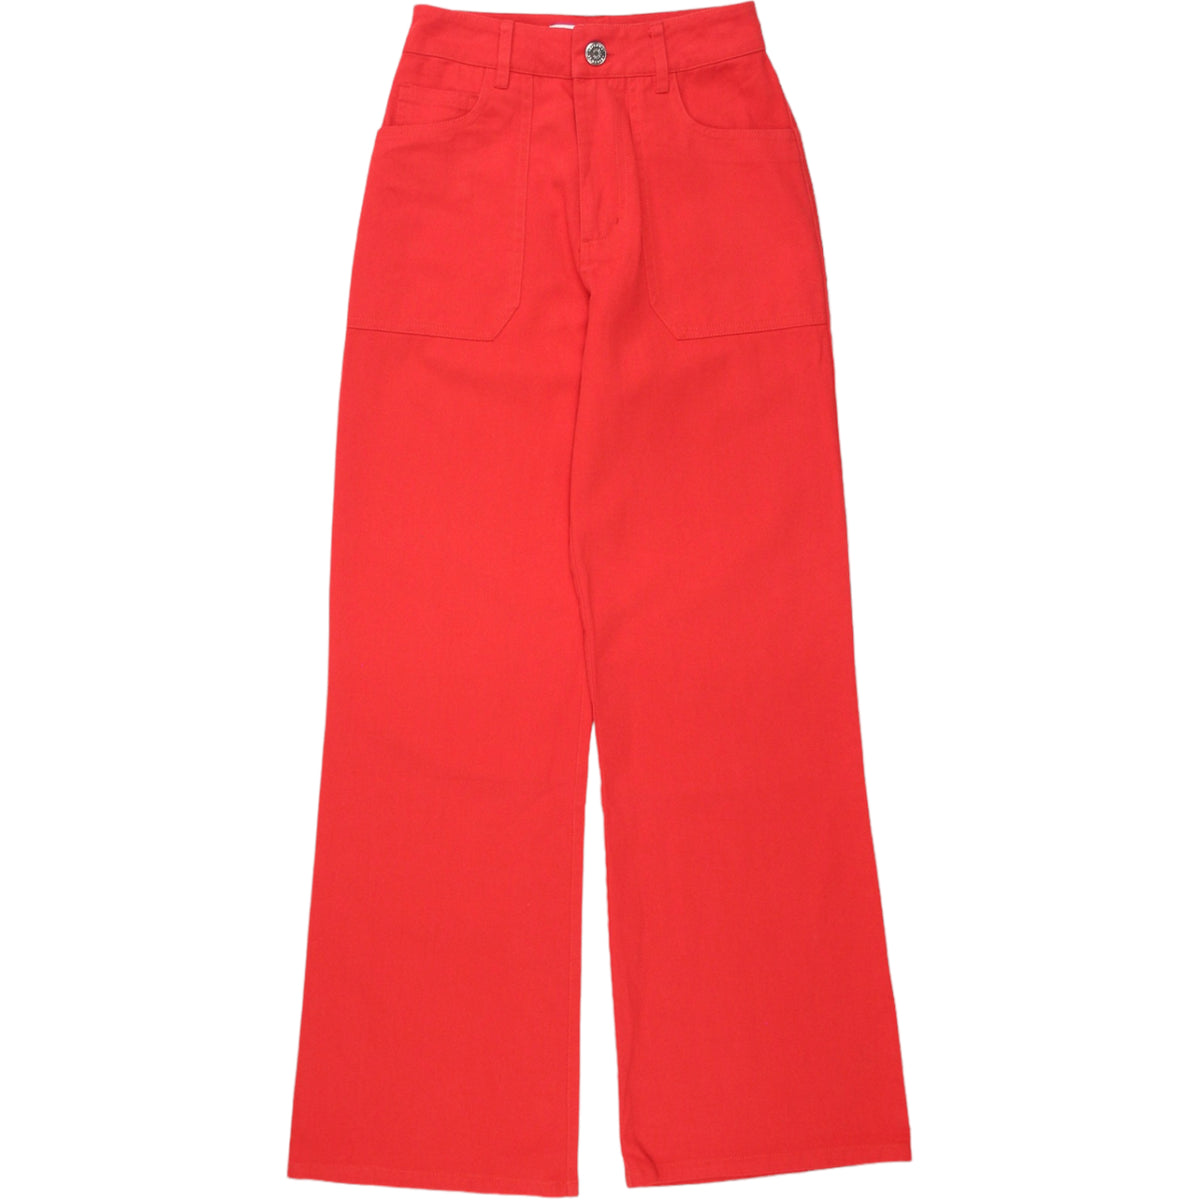 LF Markey Red Canvas Didion Trousers